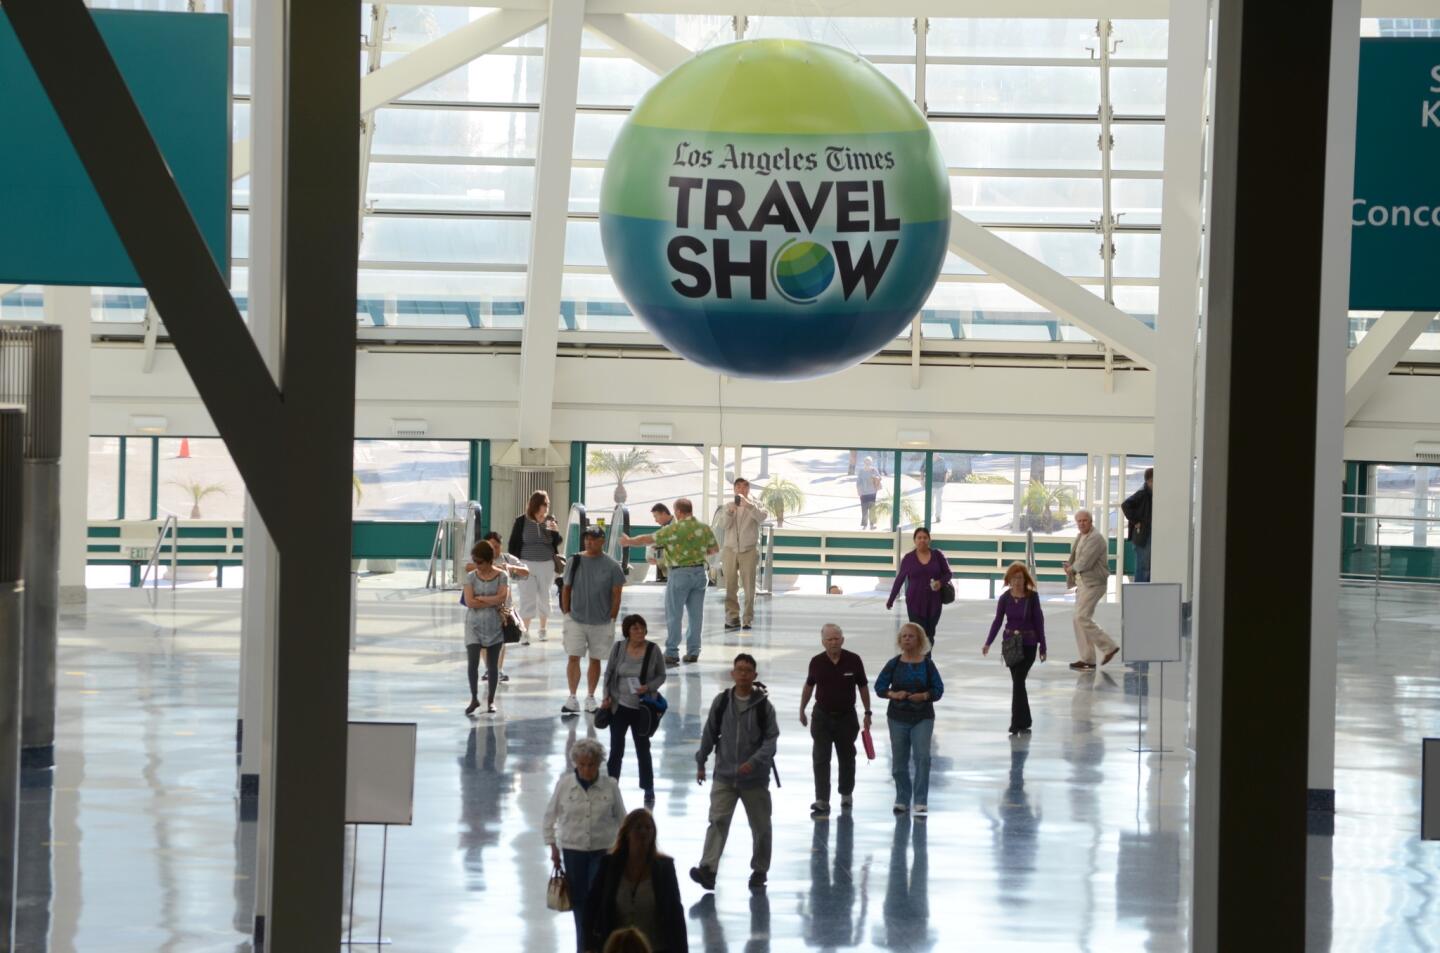 Doors open at the West Hall of the L.A. Convention Center and the L.A. Times Travel Show.